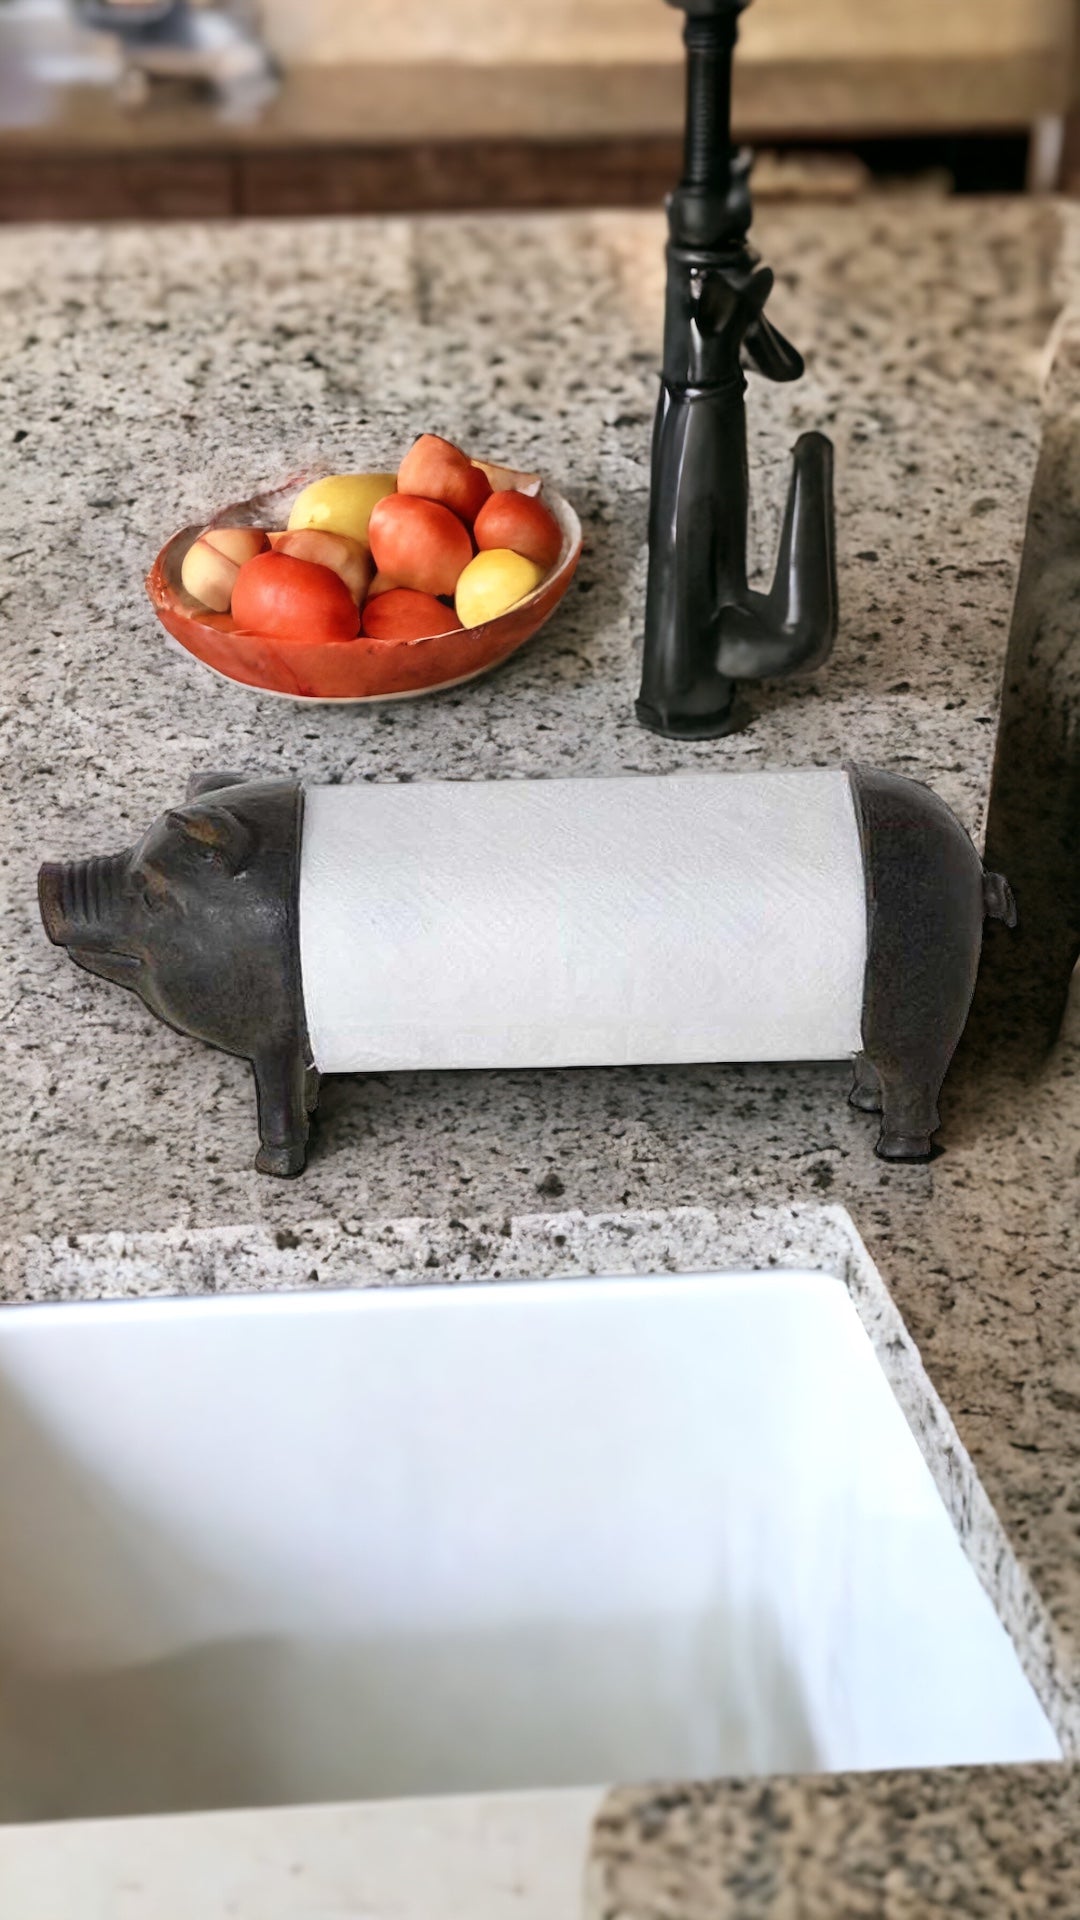 pig shaped paper towel holder on a granite countertop near a white basin sink